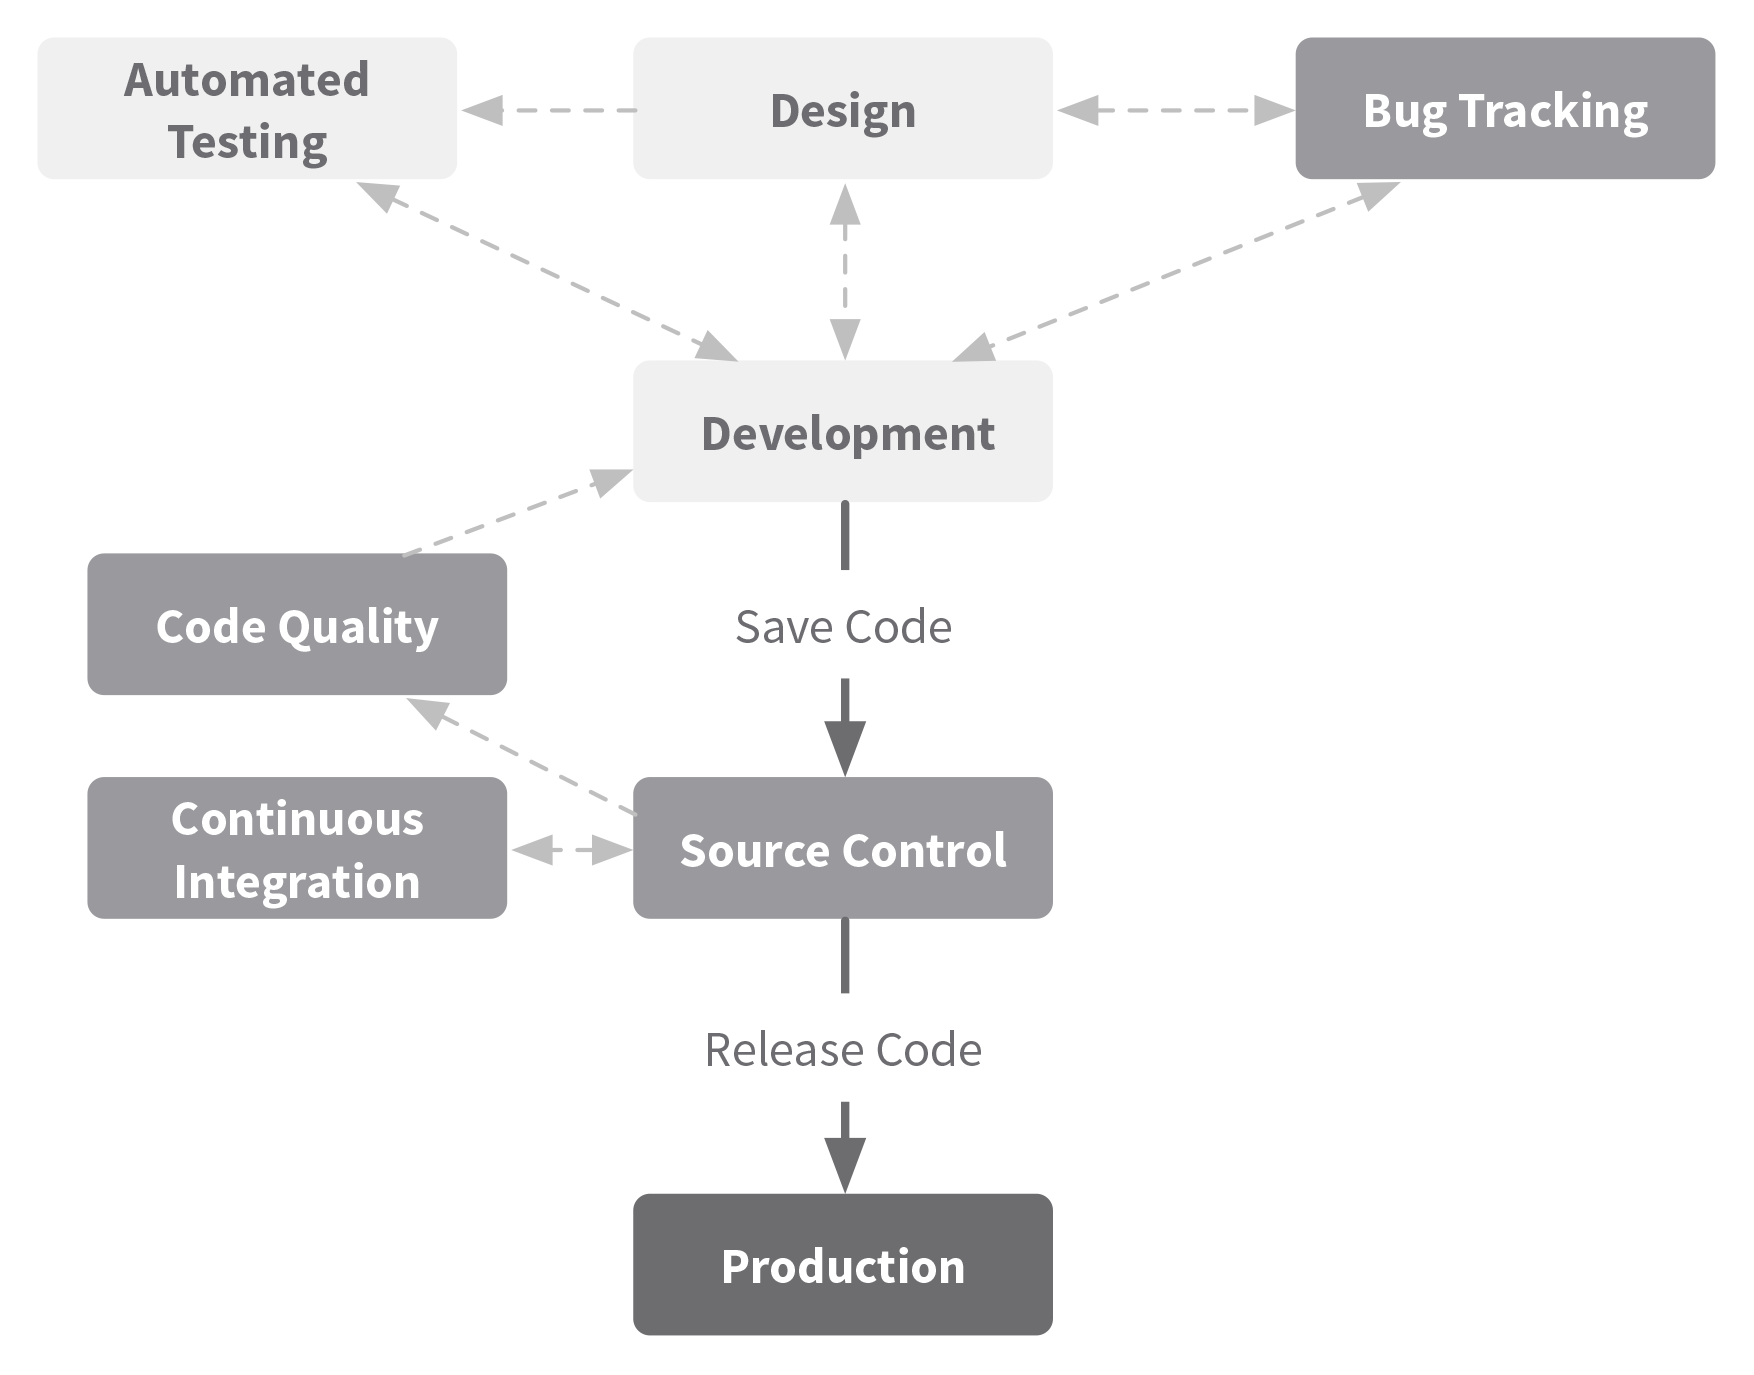 Expanding on the previous diagrams by illustrating a code quality feedback loop between source control and development.